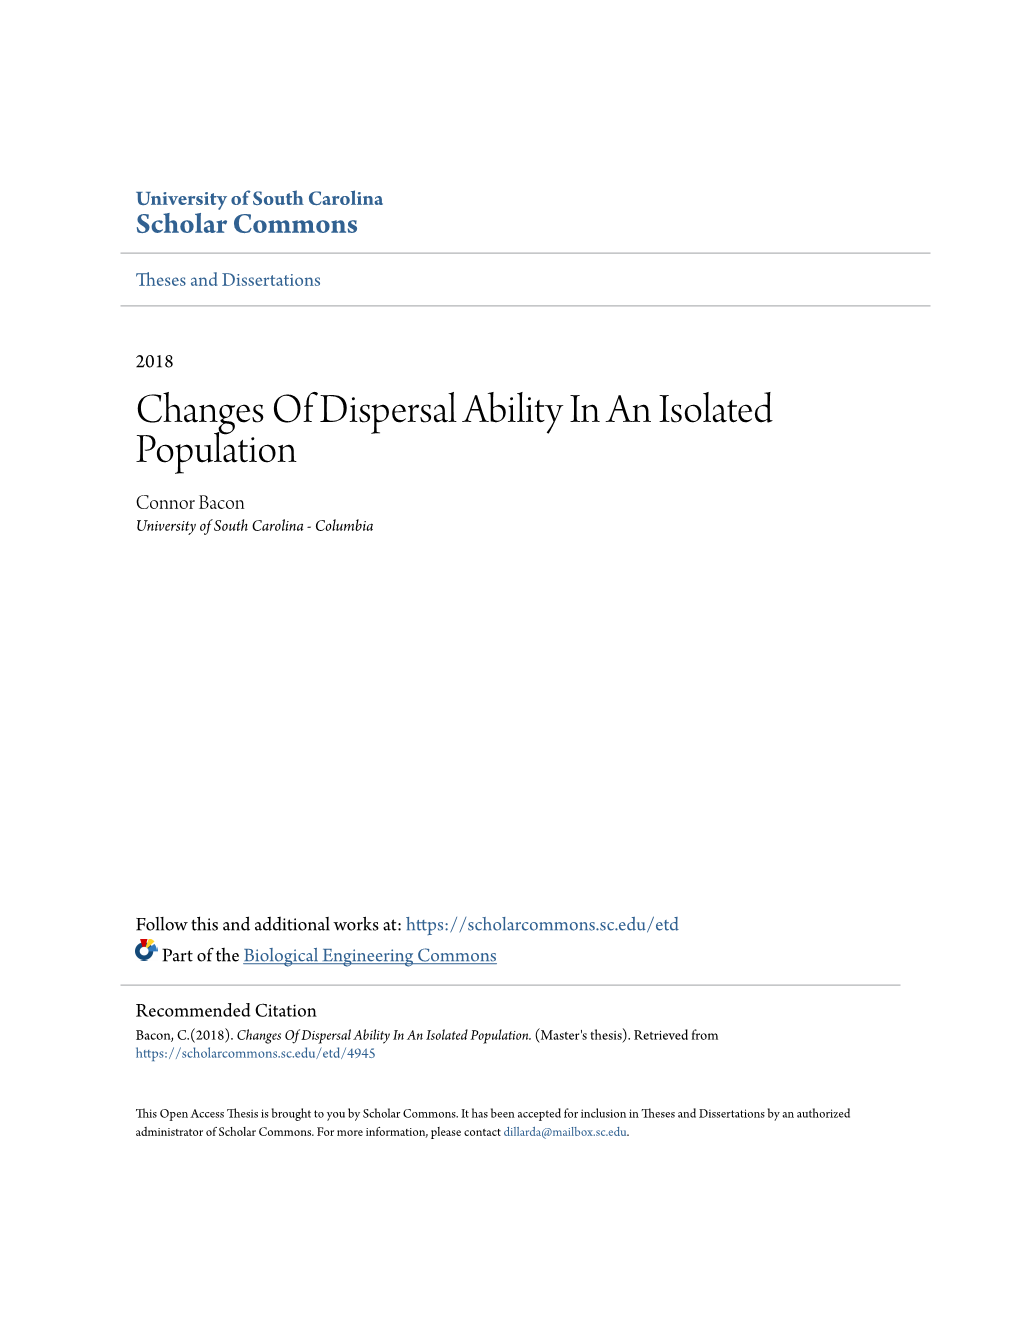 Changes of Dispersal Ability in an Isolated Population Connor Bacon University of South Carolina - Columbia